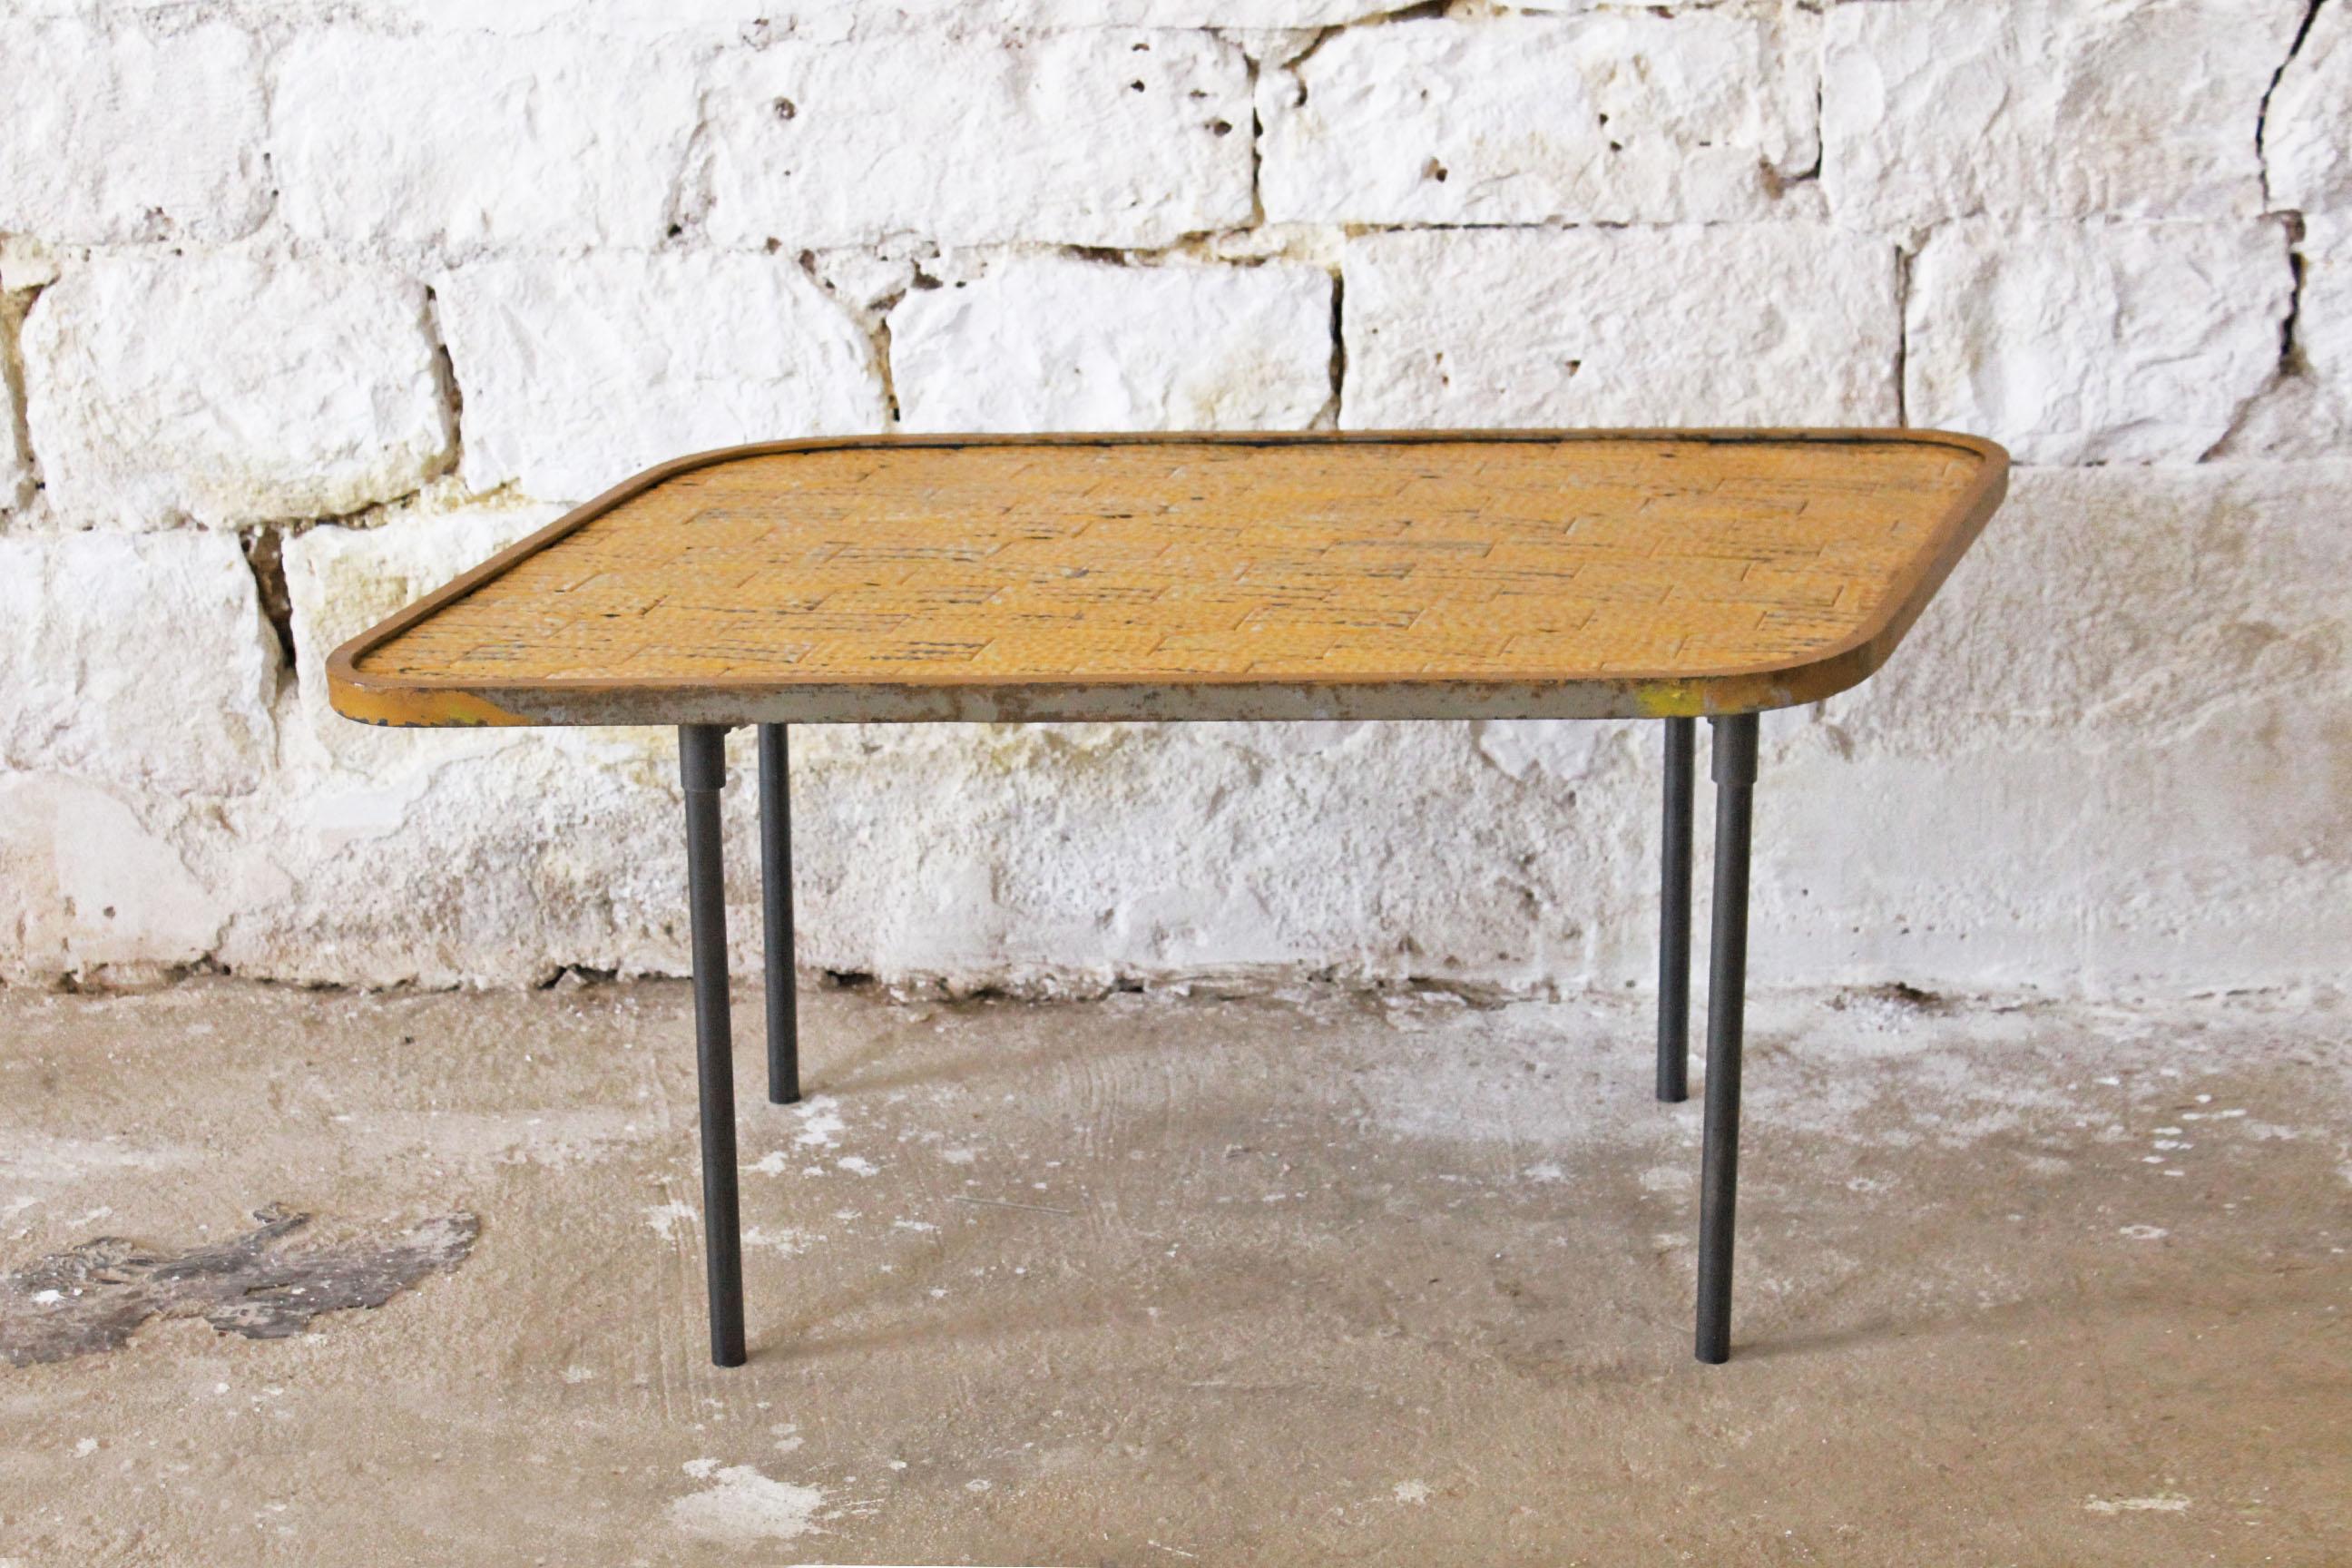 Vintage yellow coffee table tiles and steel, Italy 1950s.
A 1950s yellow coffee table. Yellow ceramic tile top and iron structure. In very good conditions. Legs can be removed for delivery. Manufactured in Italy, all components are original sign of